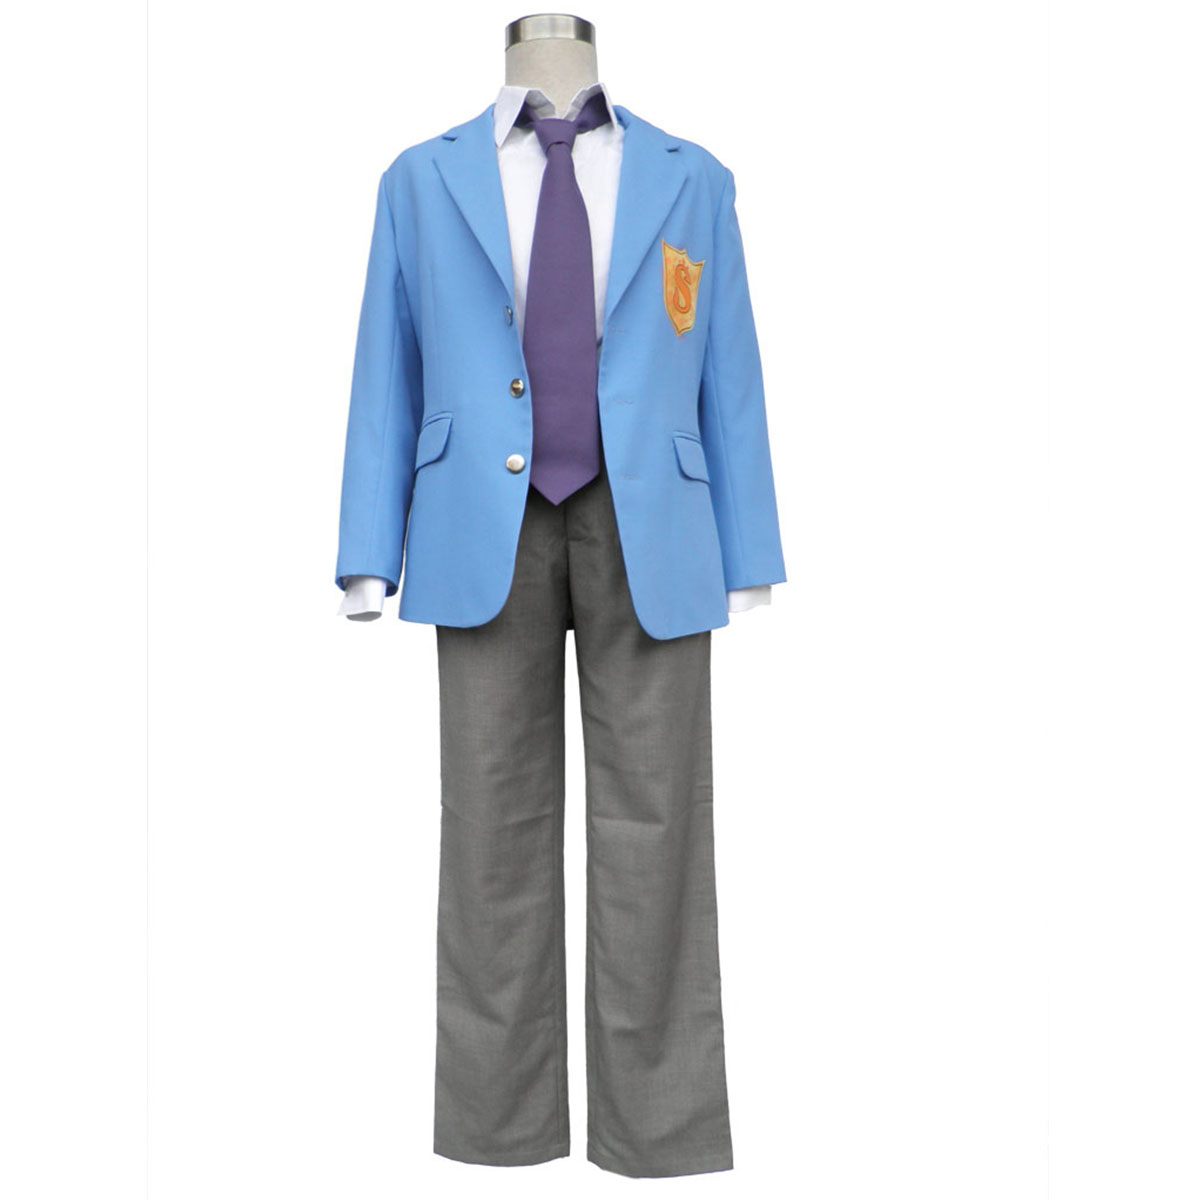 The Springs of Prince Male Uniforms Cosplay Costumes New Zealand Online Store